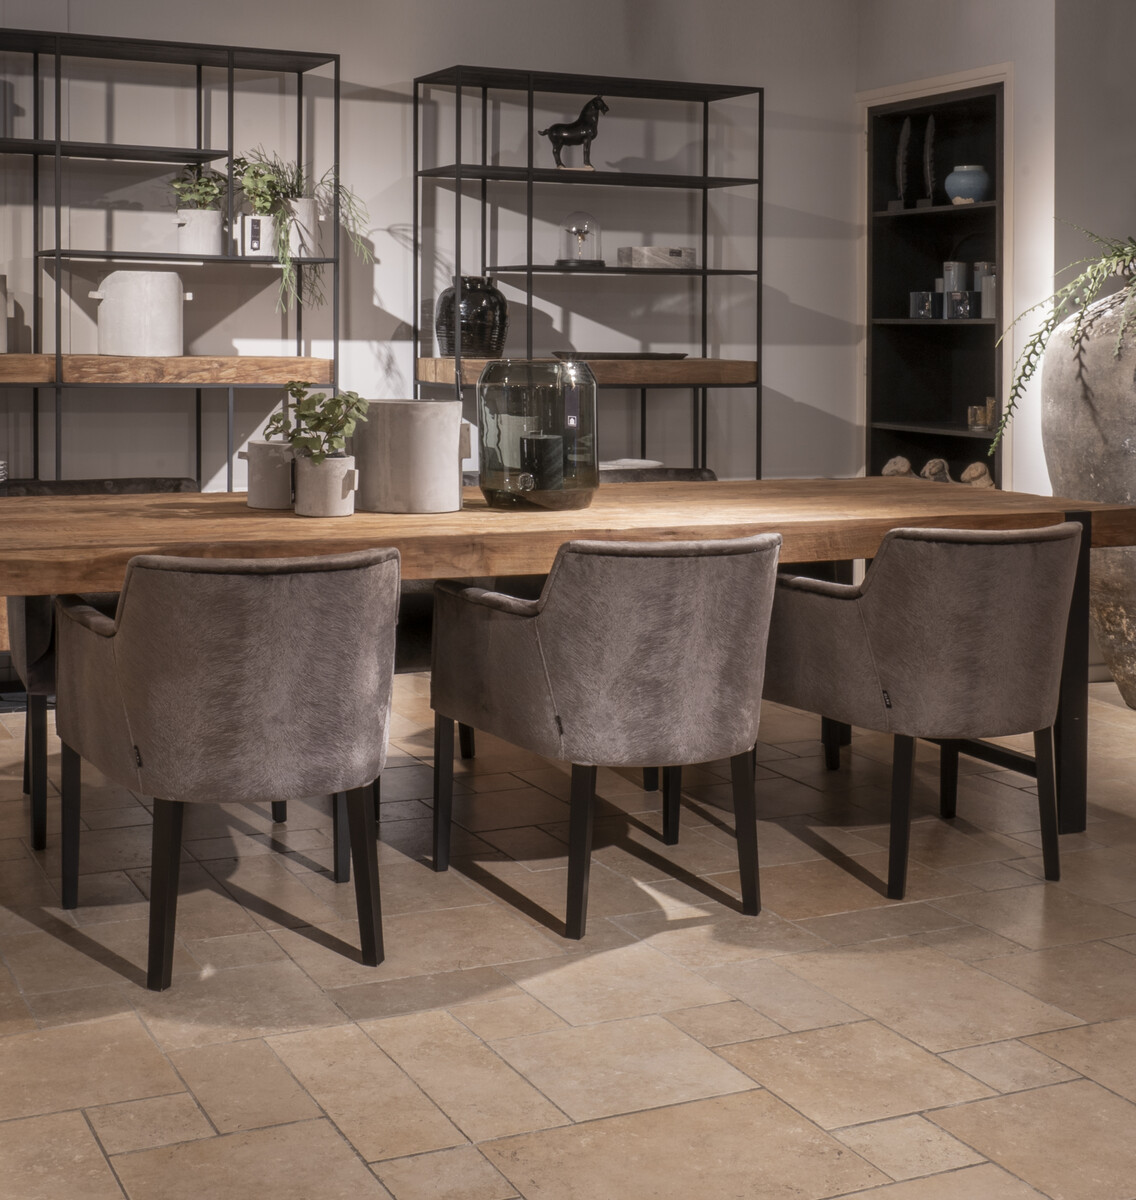 Stoel by Olàv Home Stoelen - Collectie - Looiershuis